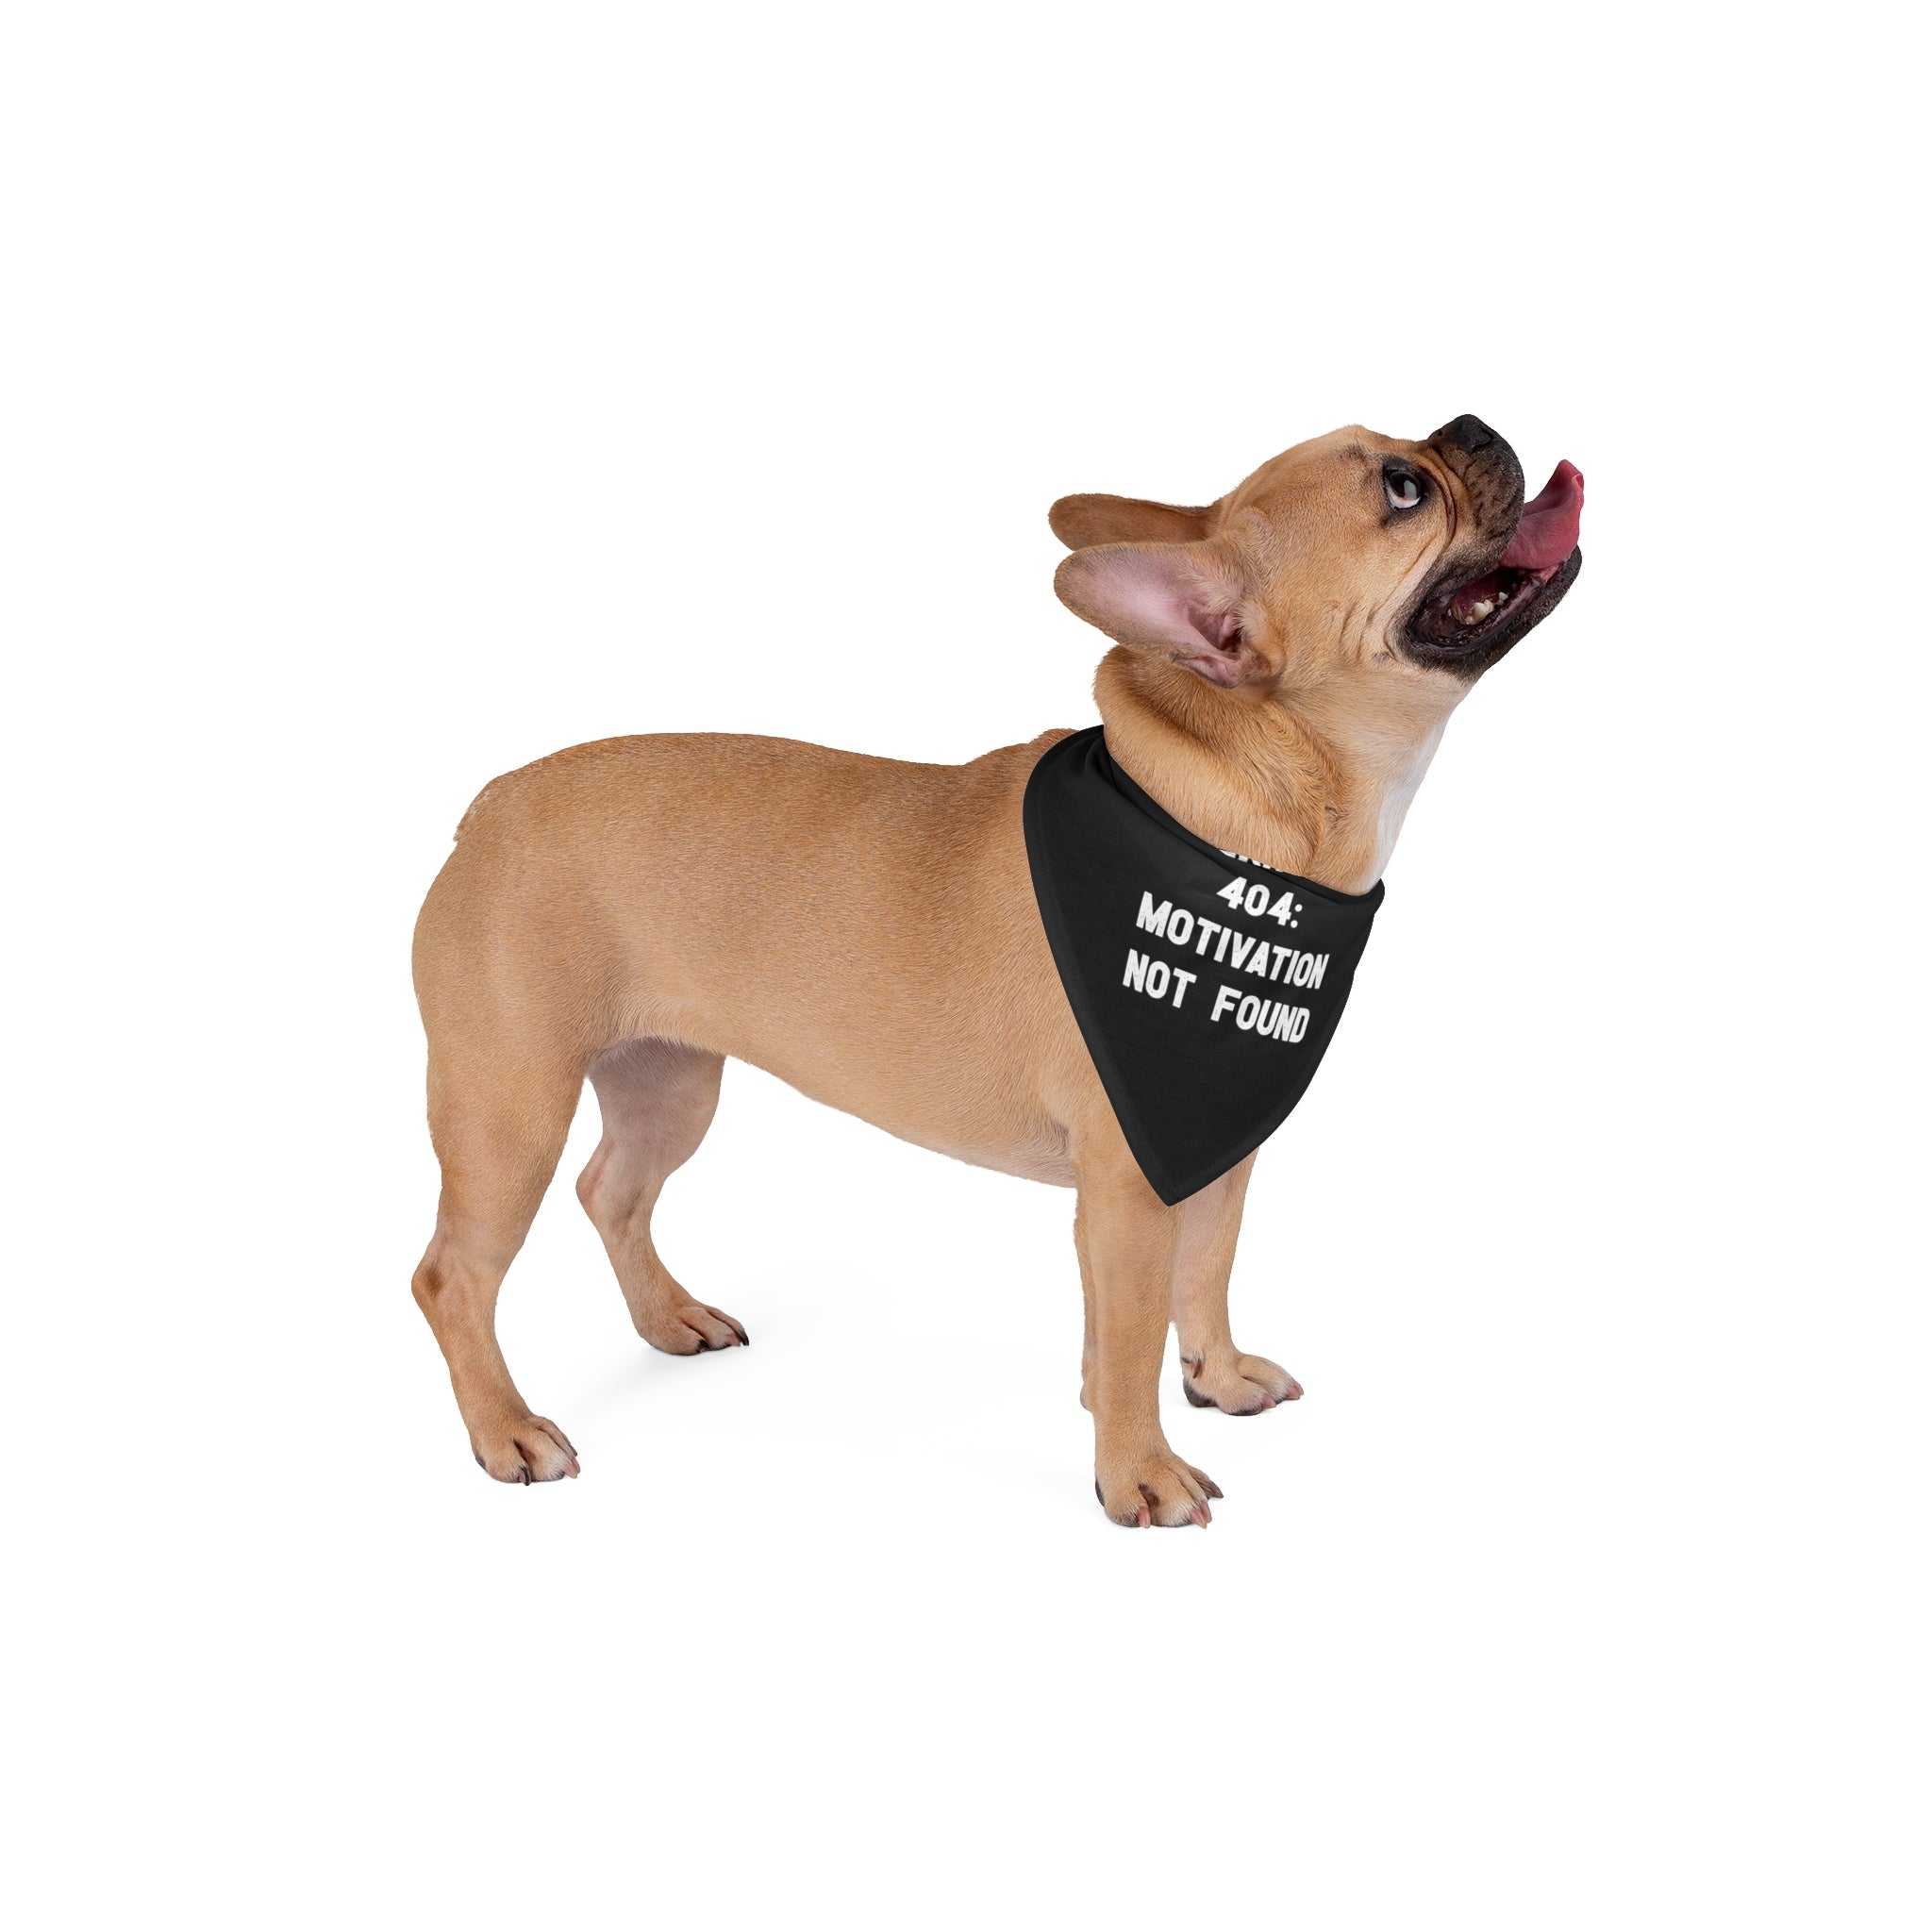 A small brown dog wearing an **Error 404: Motivation not found - Pet Bandana** made of soft-spun polyester that reads "404: MOTIVATION NOT FOUND" is standing on a white background, looking upward with its tongue out.